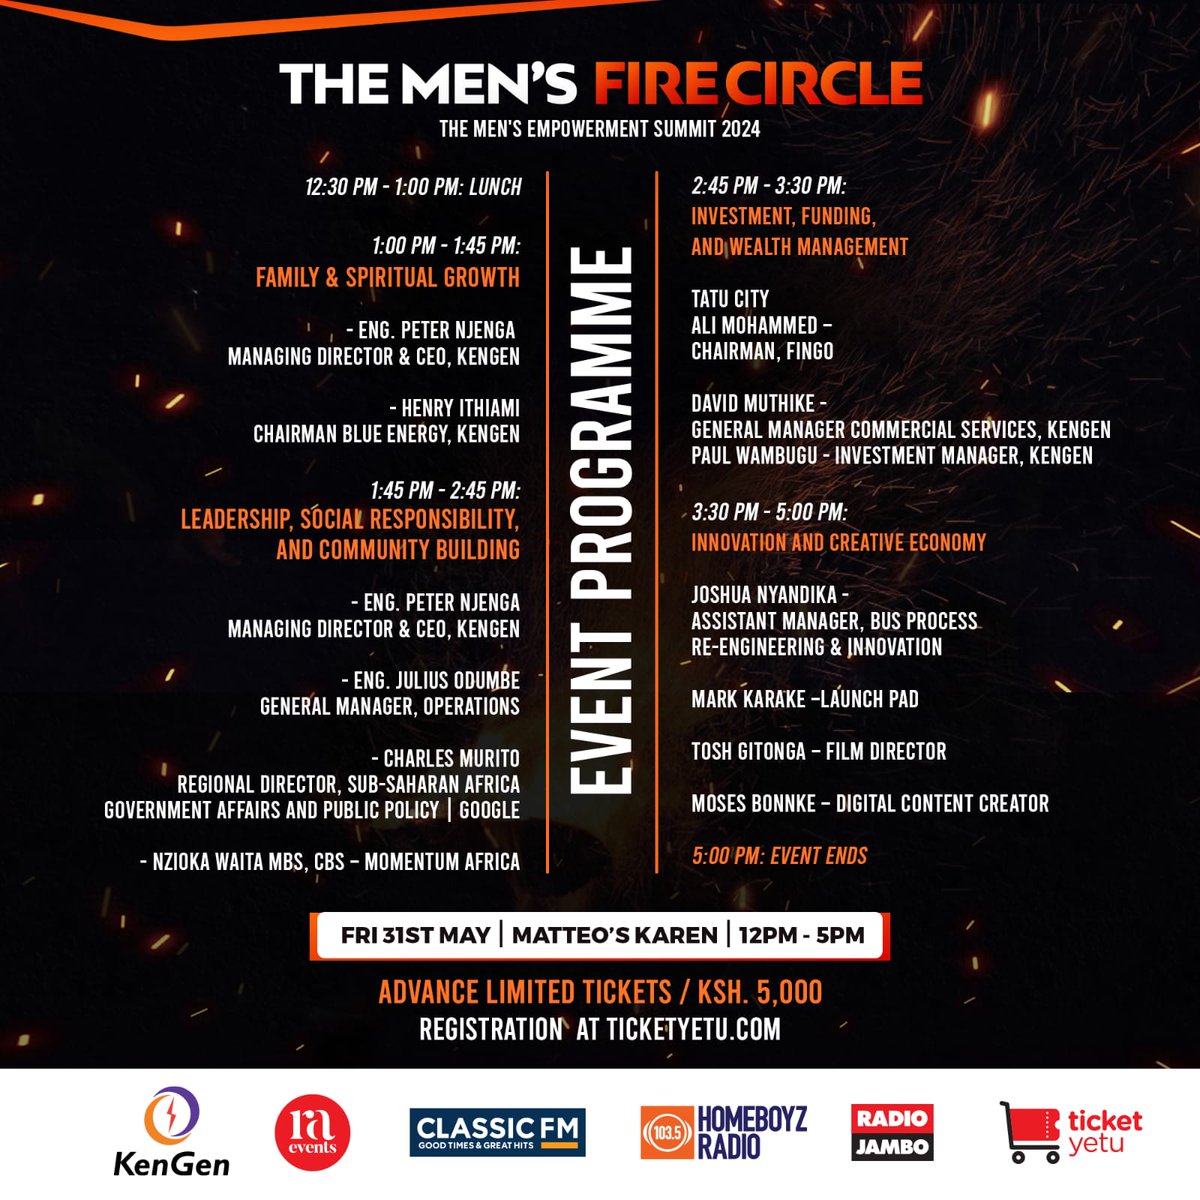 'Guys' day out done right! Join us at Matteo's for the Men's Empowerment Summit 2024. Inspiring leaders and building brilliance in Men. Enjoy excellent company, and amazing talks. 
#MensFireCircleKe
#RadioAfricaEvents 
Powered by: @radioafricaevents @kengenkenya